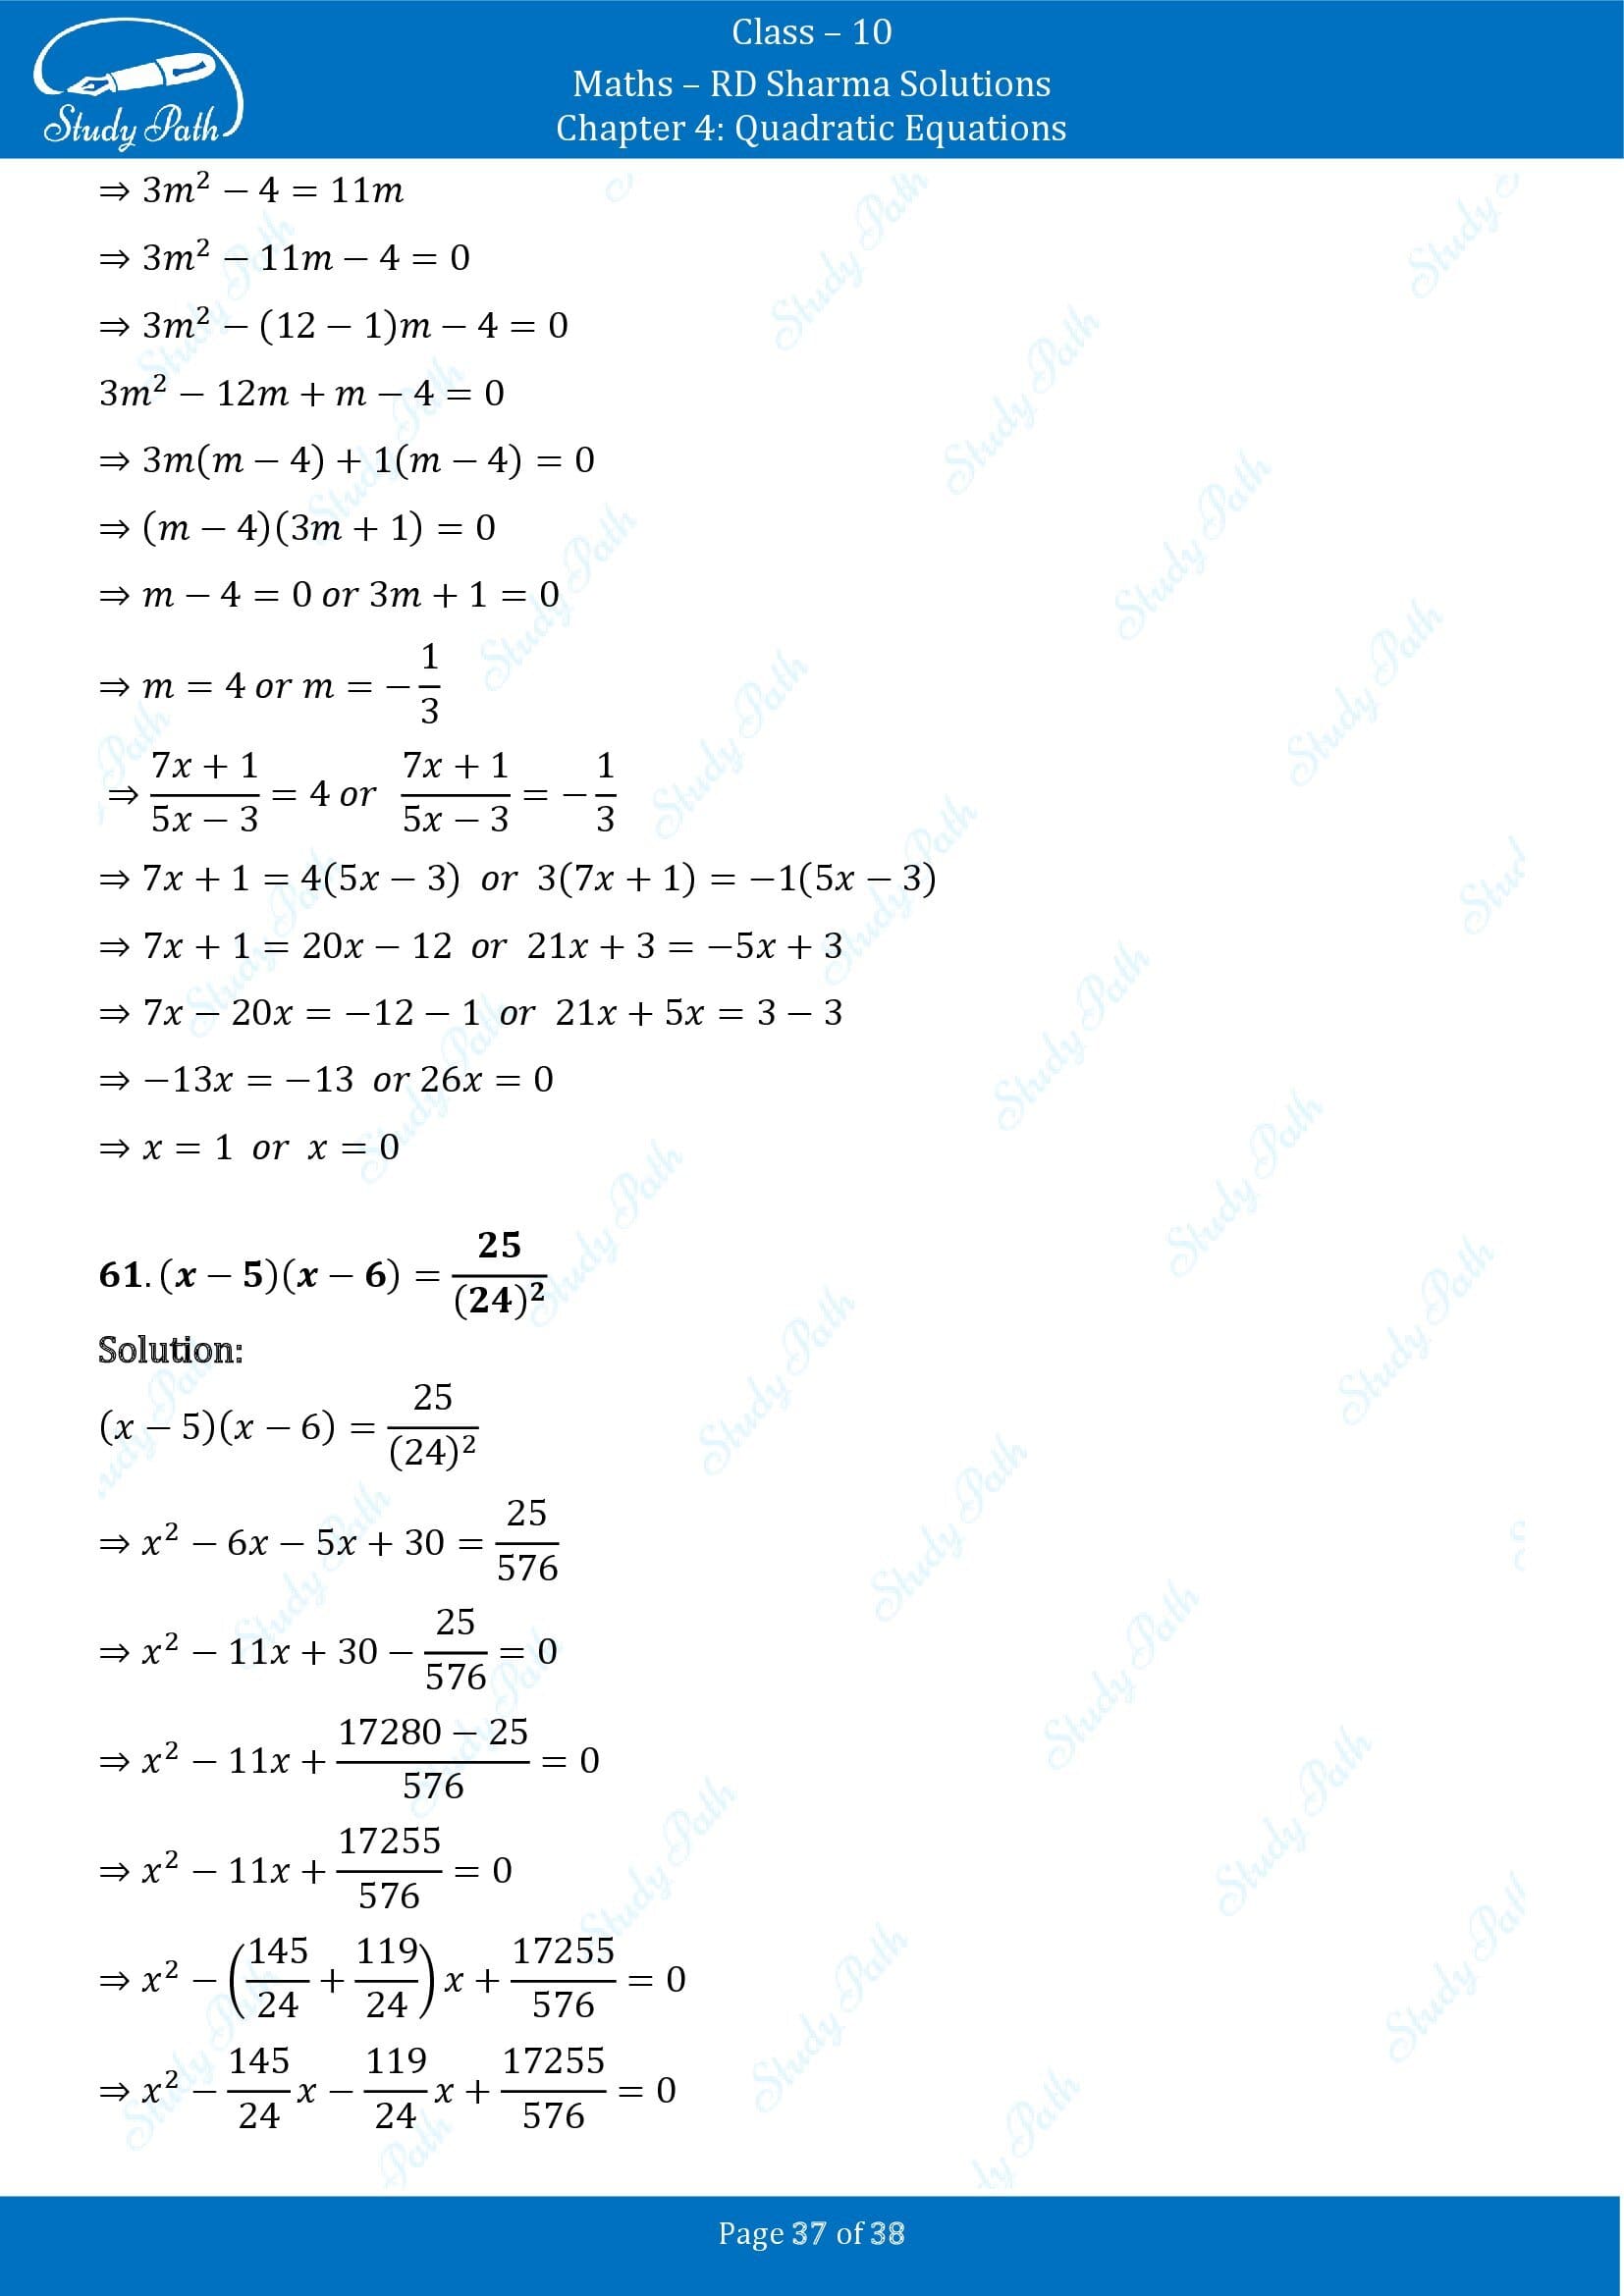 RD Sharma Solutions Class 10 Chapter 4 Quadratic Equations Exercise 4.3 00037